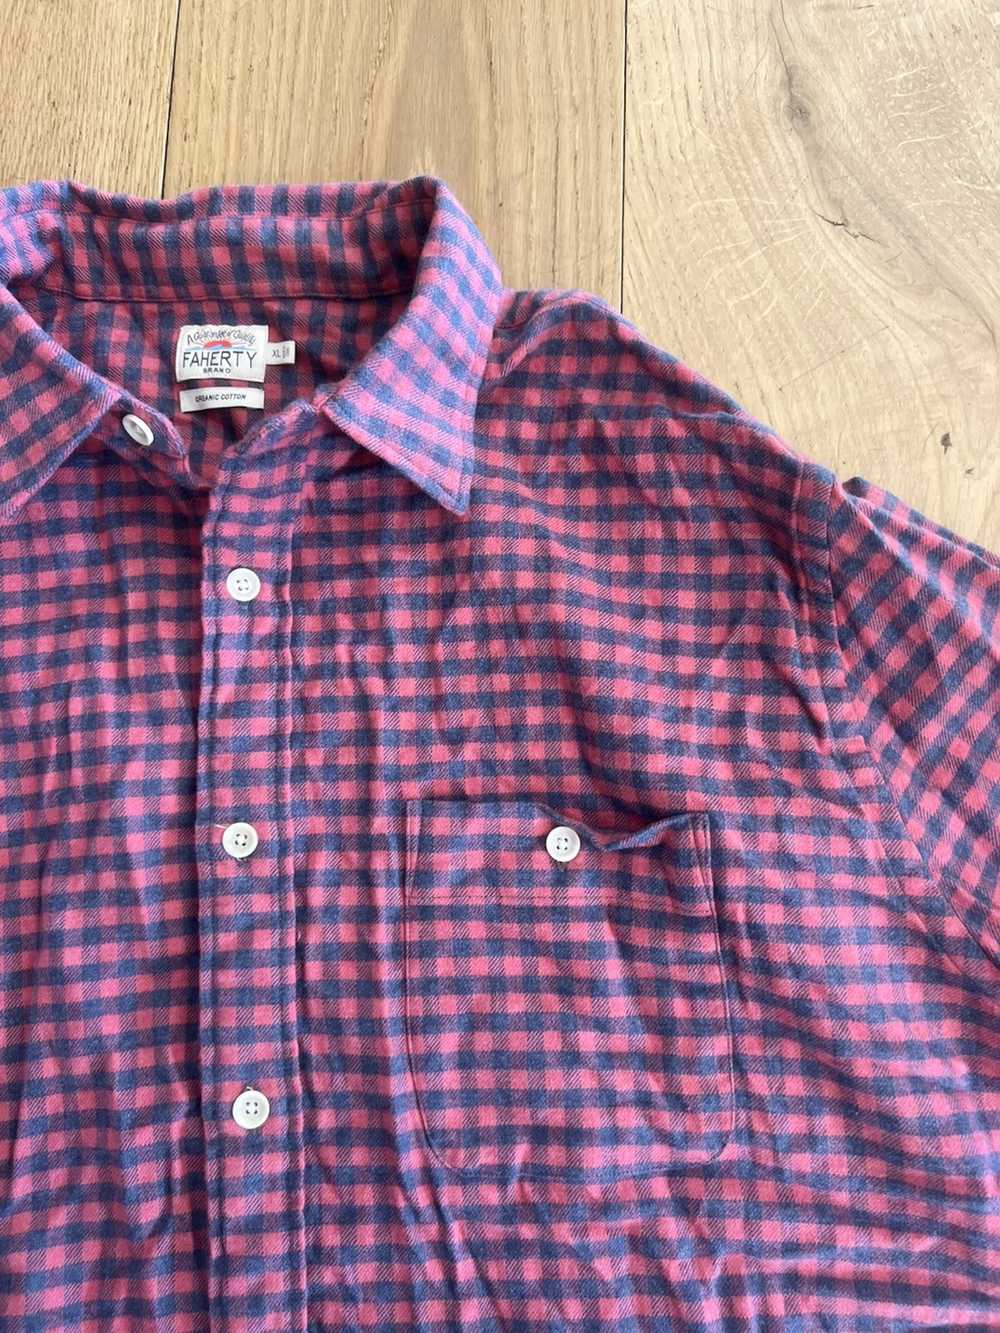 Faherty Faherty brand pink/red and blue gingham s… - image 2